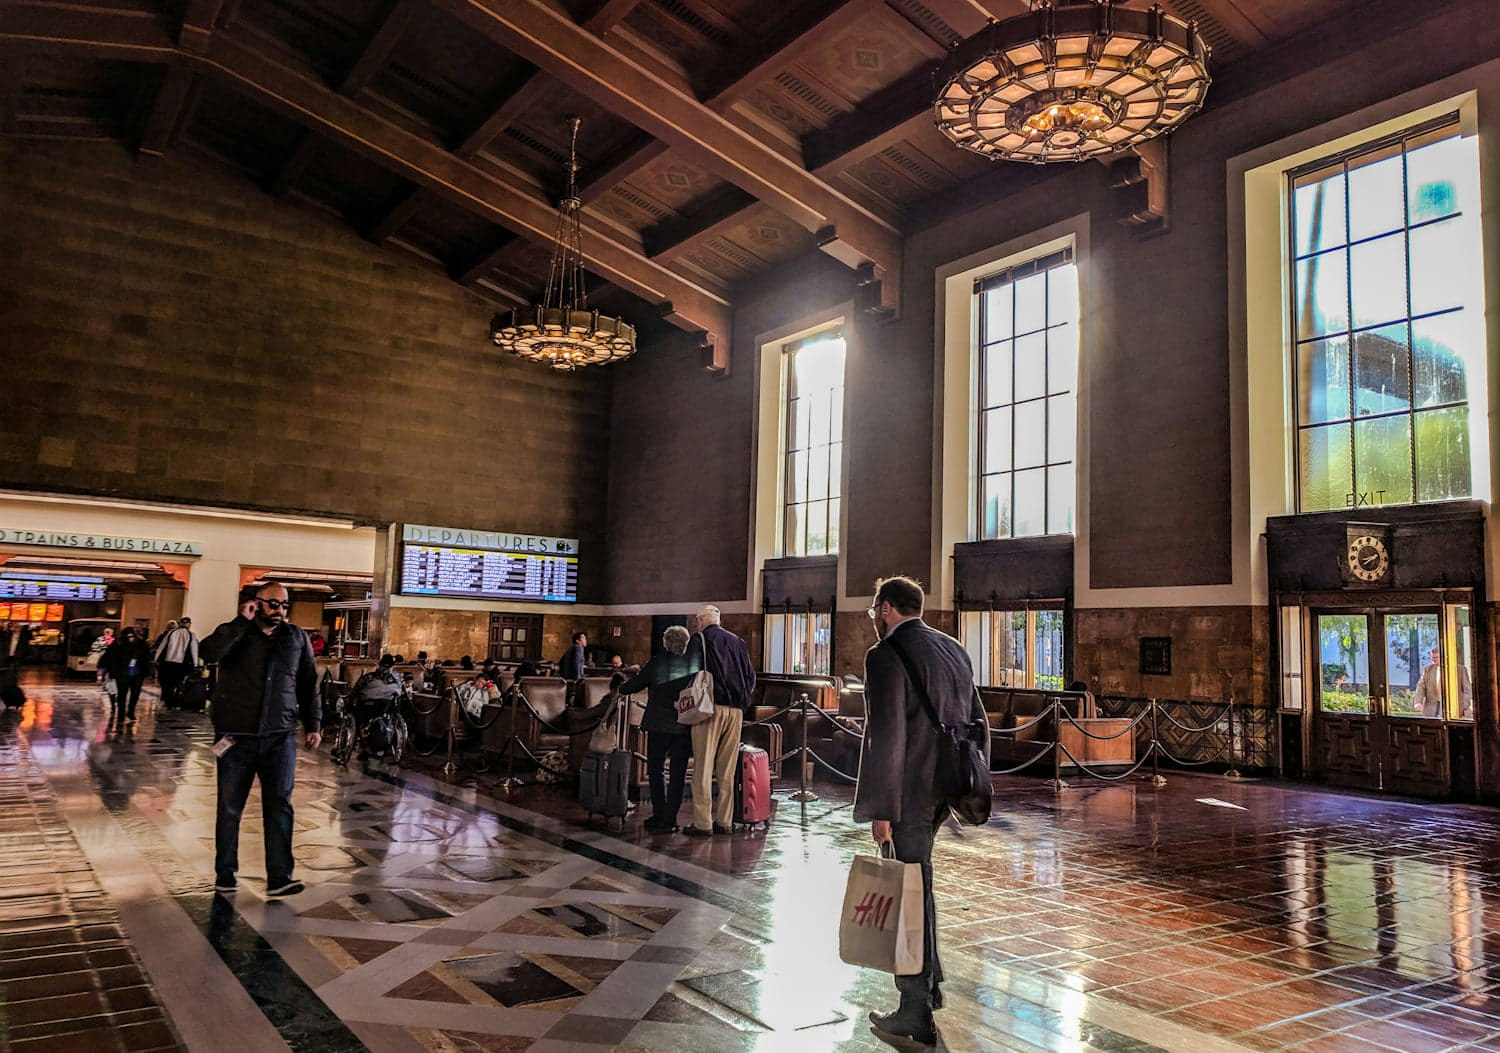 Warm light fills the Mission Revival and art deco interior of Los Angeles' Union Station, which has a dark wood ceiling and dark leather club chairs for passengers to wait in 